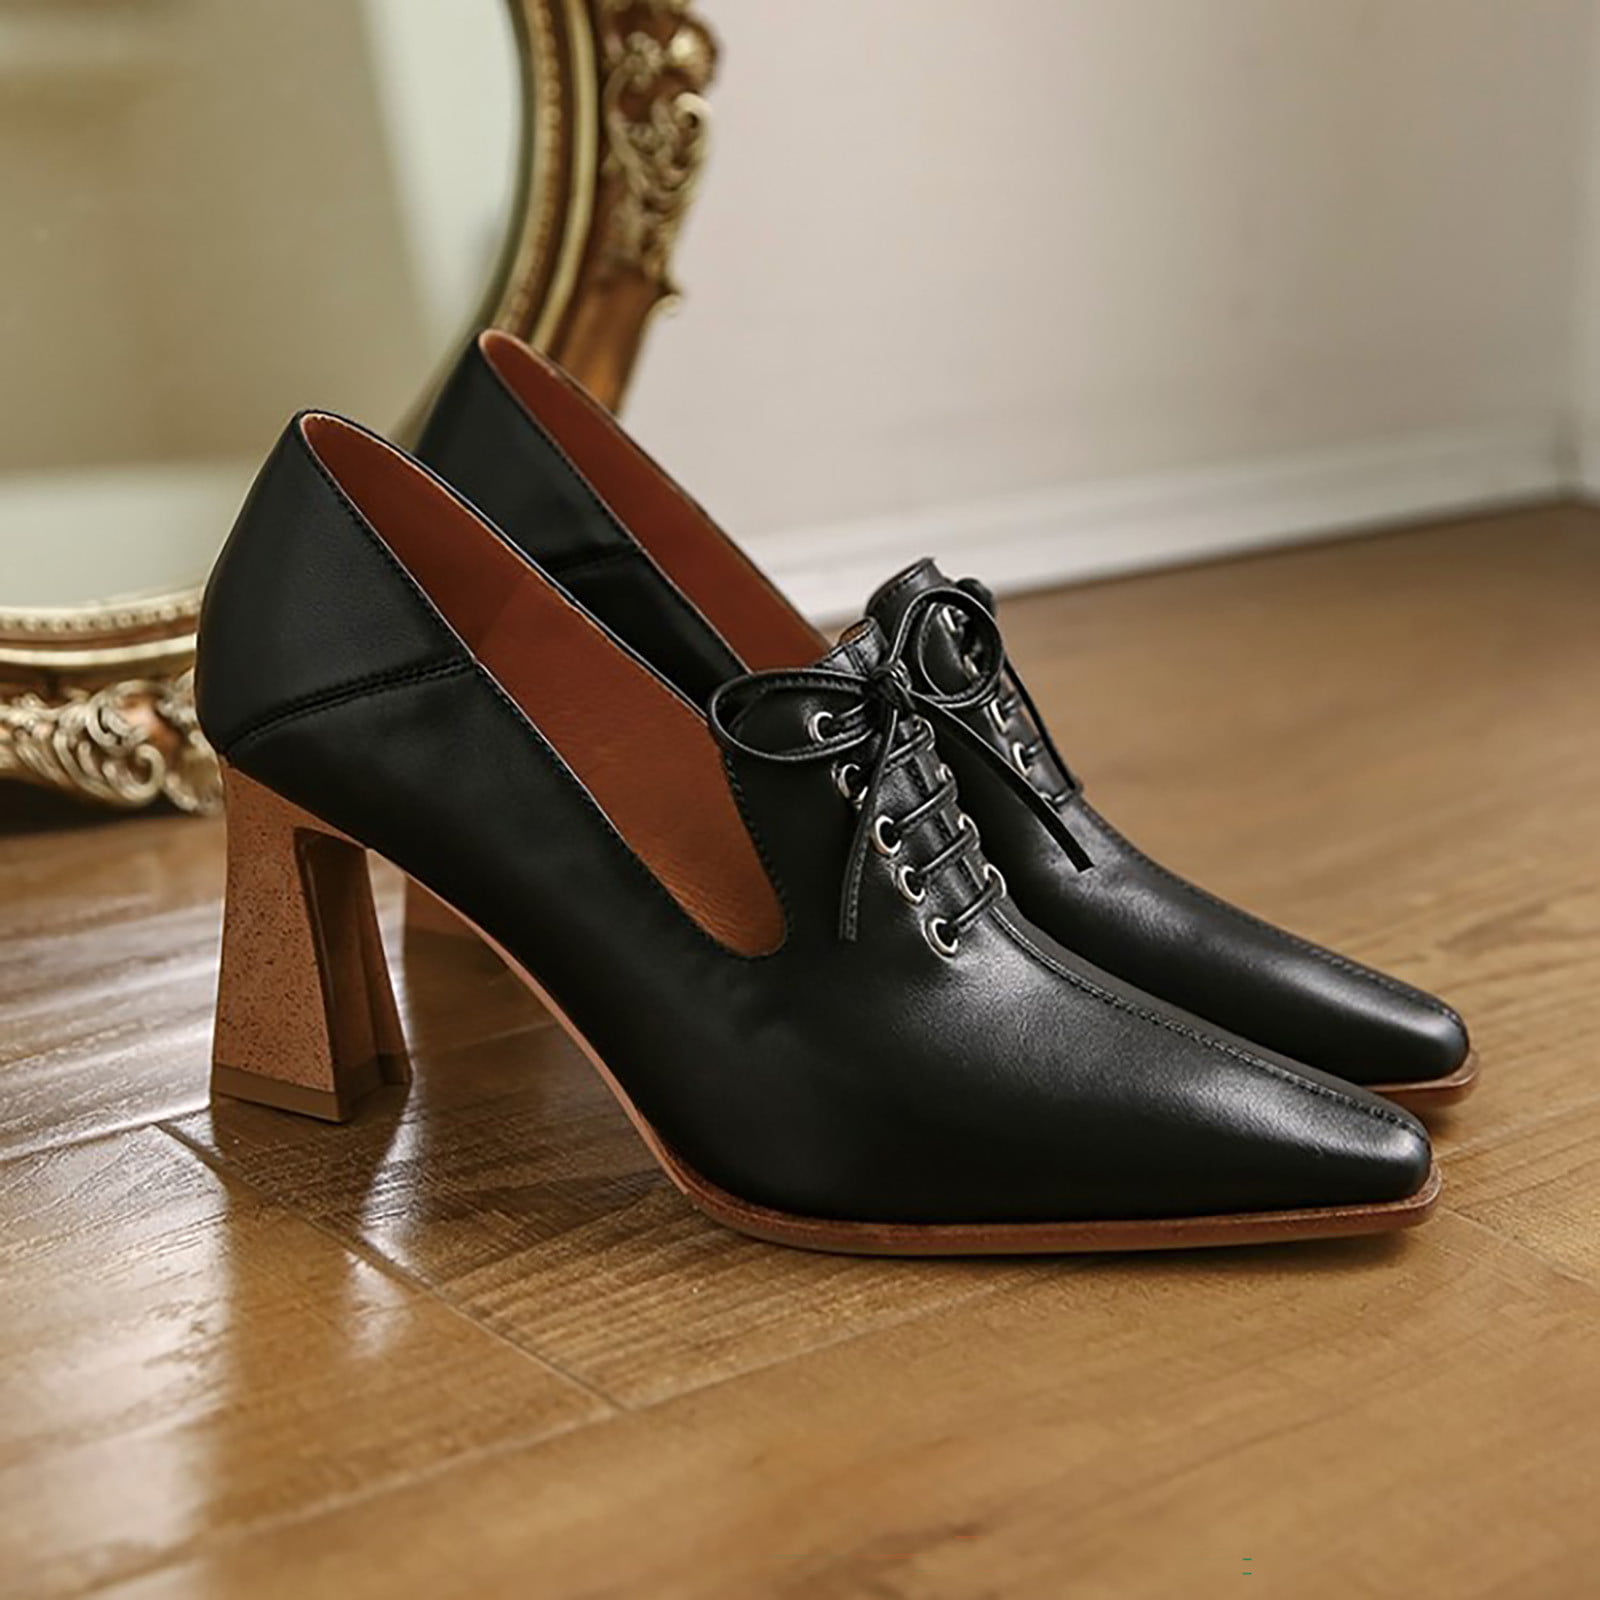 Dress Shoes Sexy Heel High Women French Heeled Shallow Pointed Head Low  Soft Leather Job Professional Single From Dahuacong, $30.57 | DHgate.Com